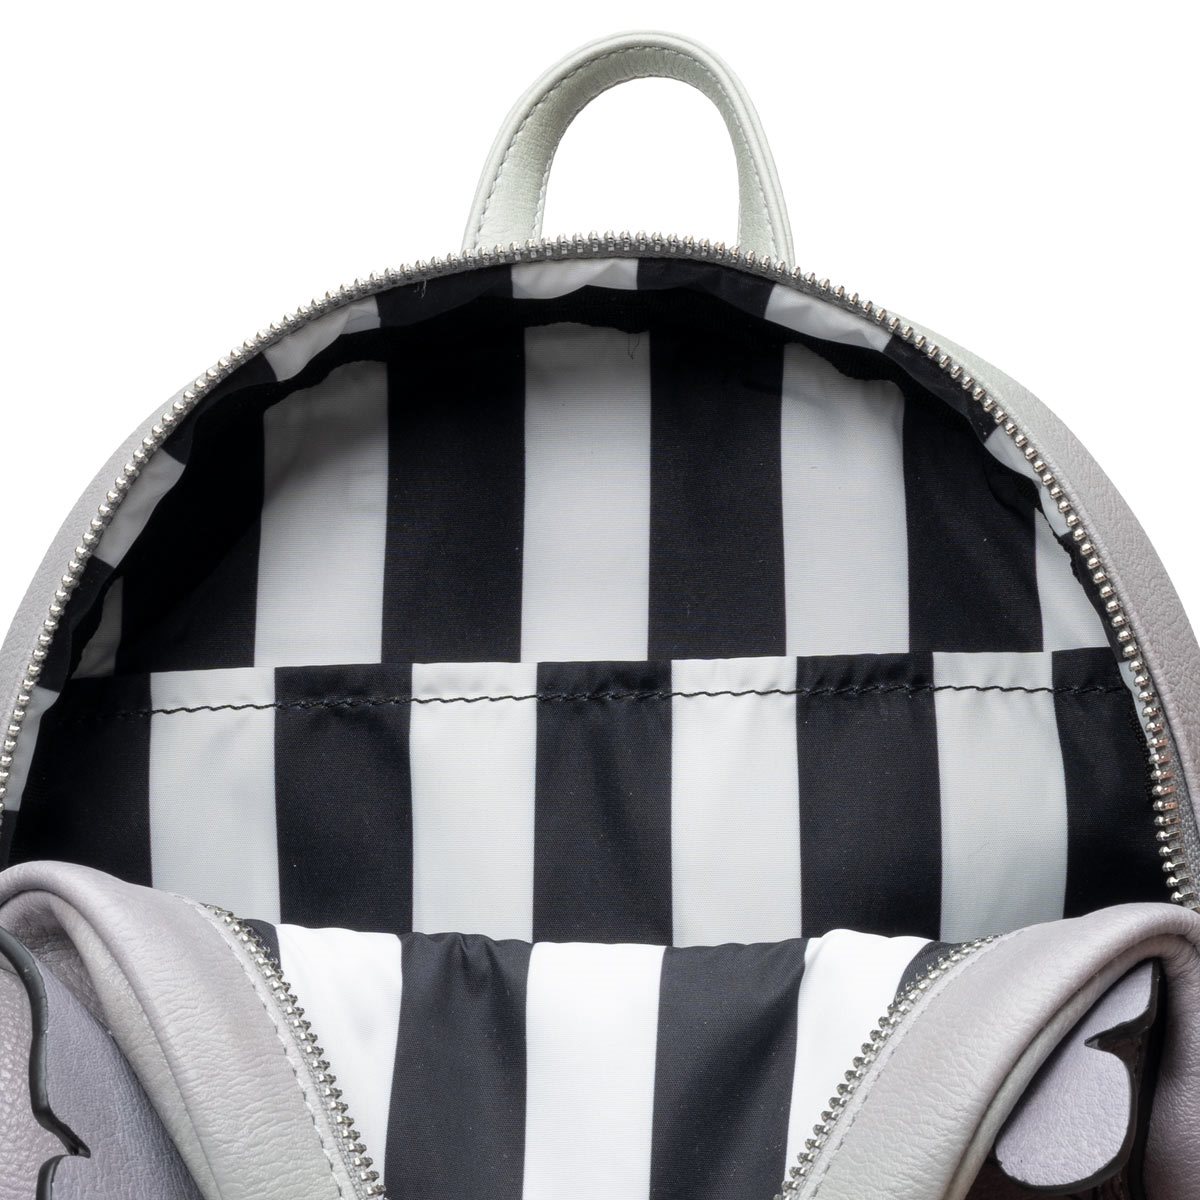 White and Grey Checkered Backpack  White leather backpack, Women